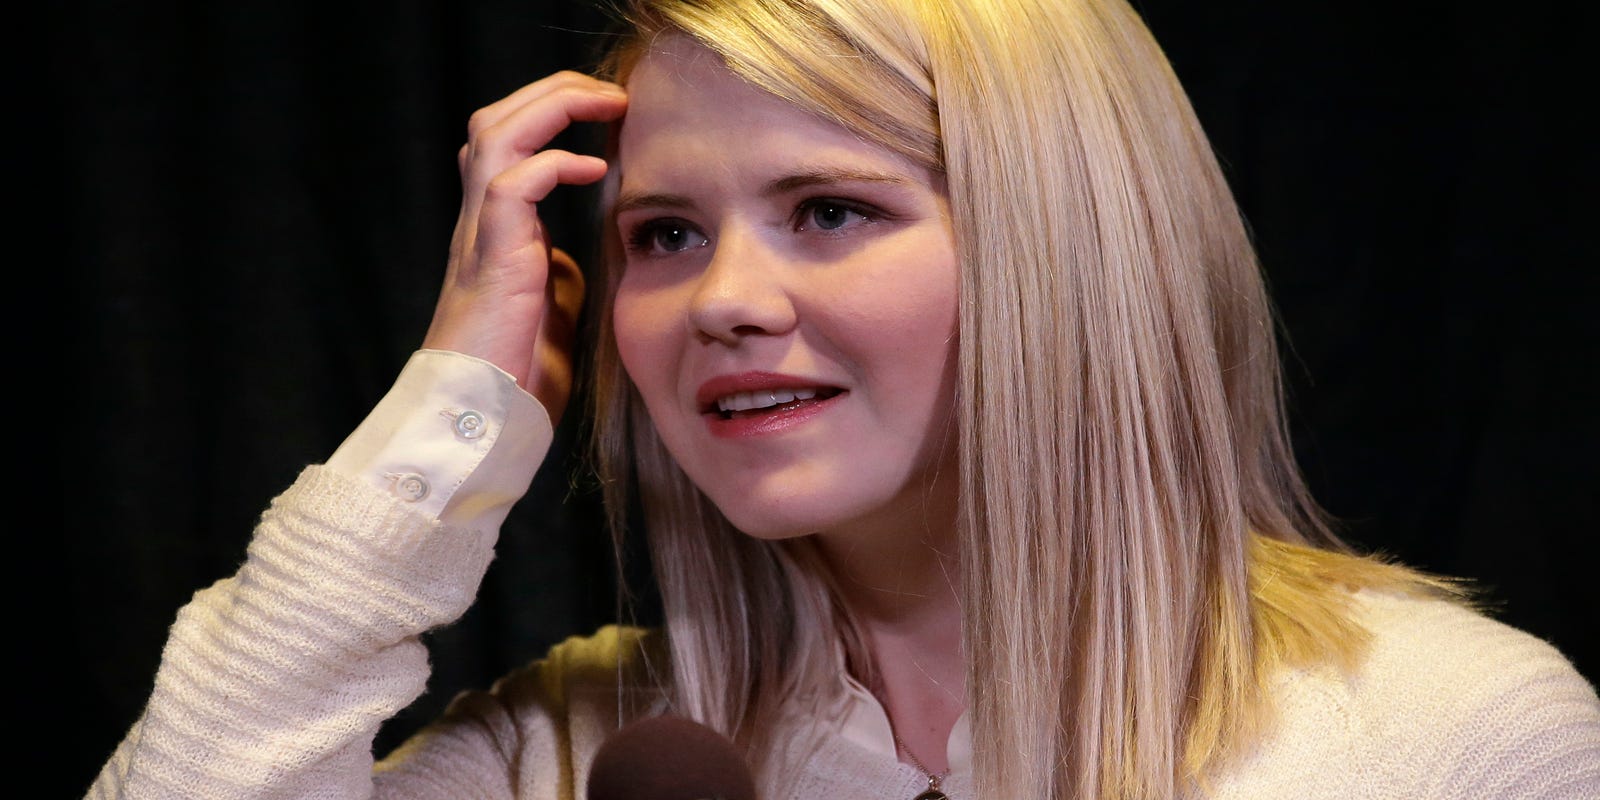 Kidnap And Force Porn - Elizabeth Smart: Porn made my ordeal even worse